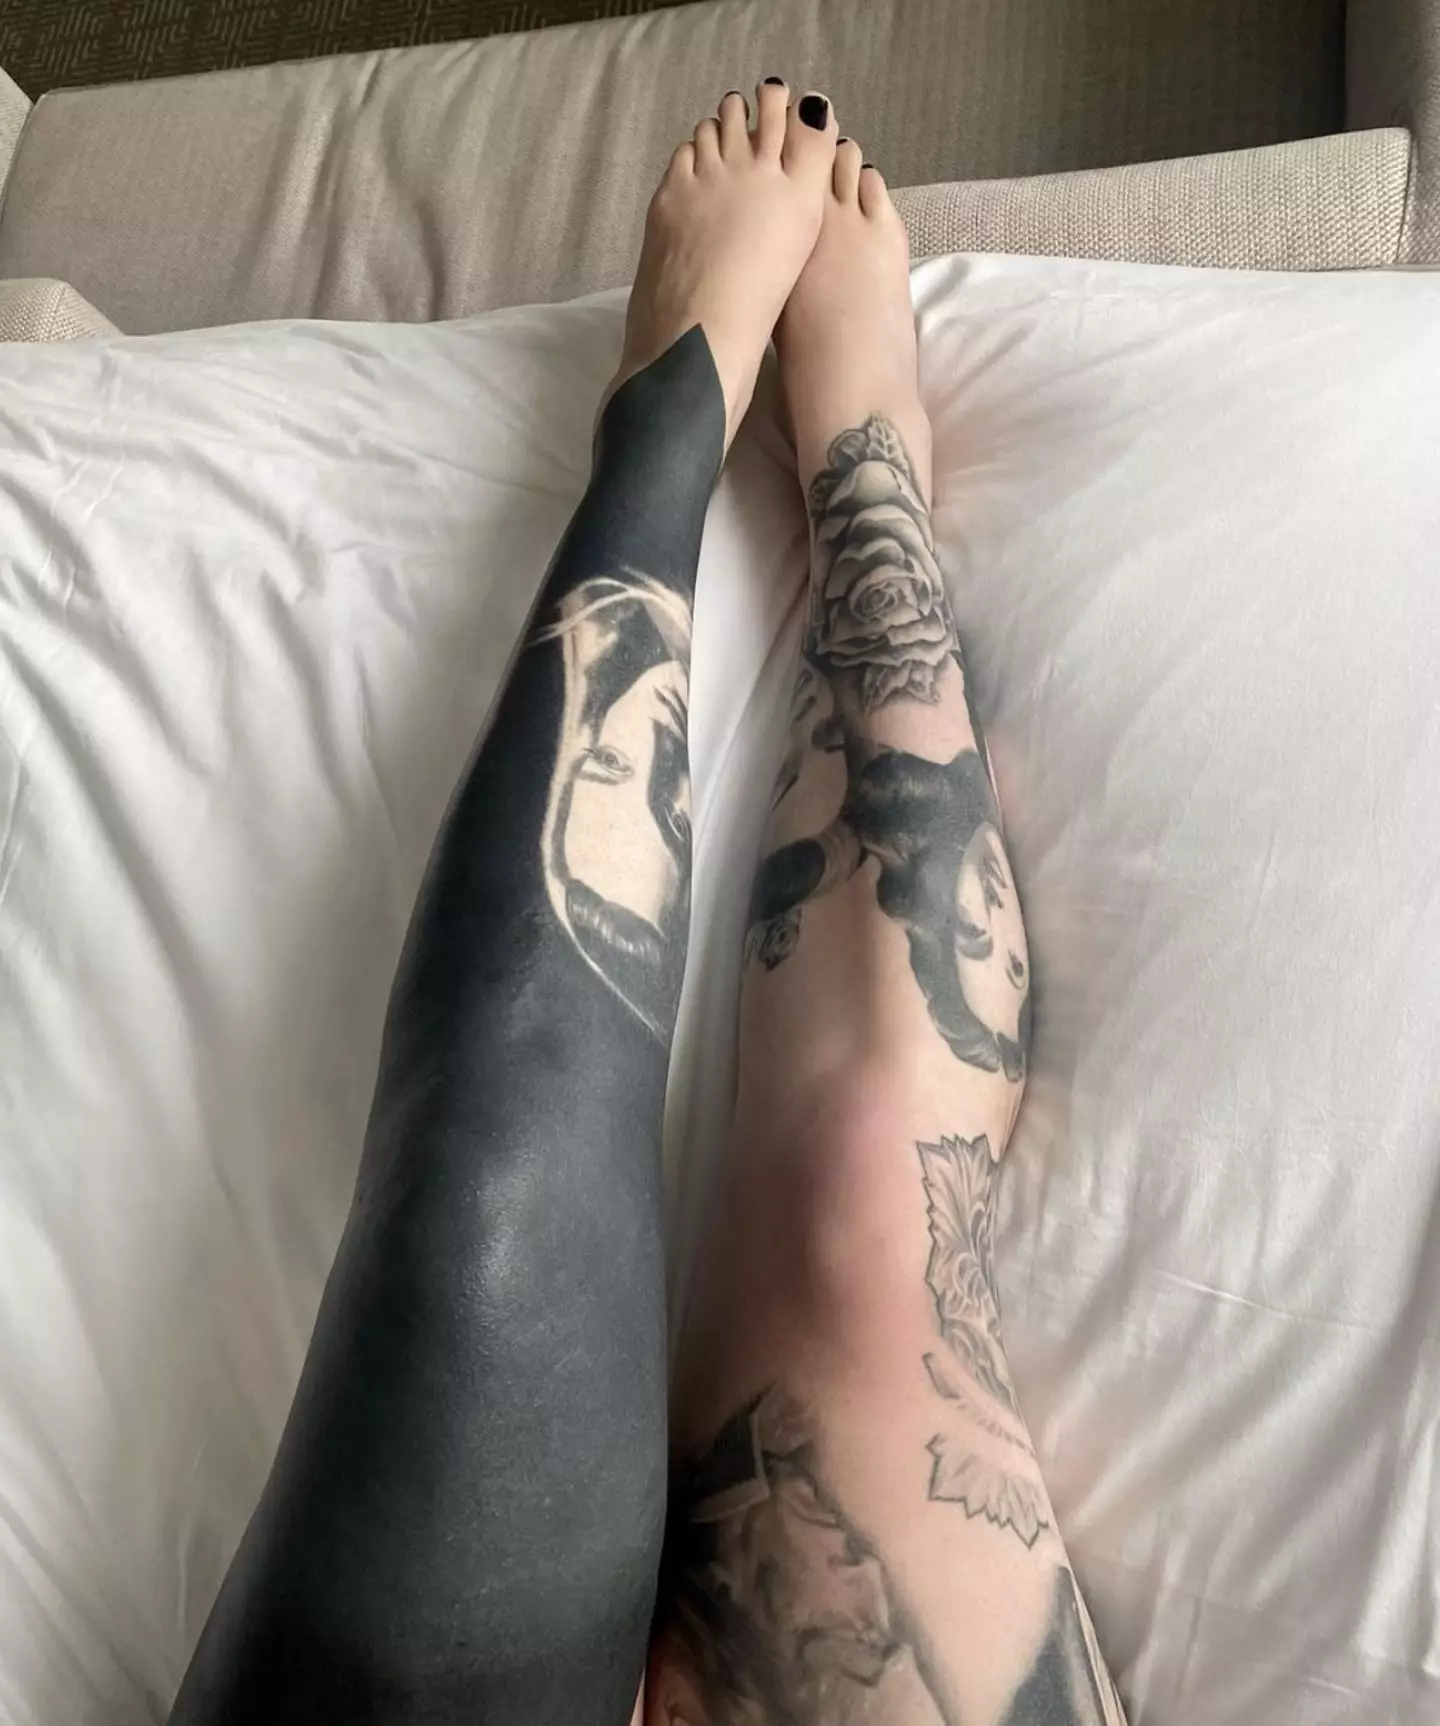 Kat Von D has started to cover up her tattoos with solid black.